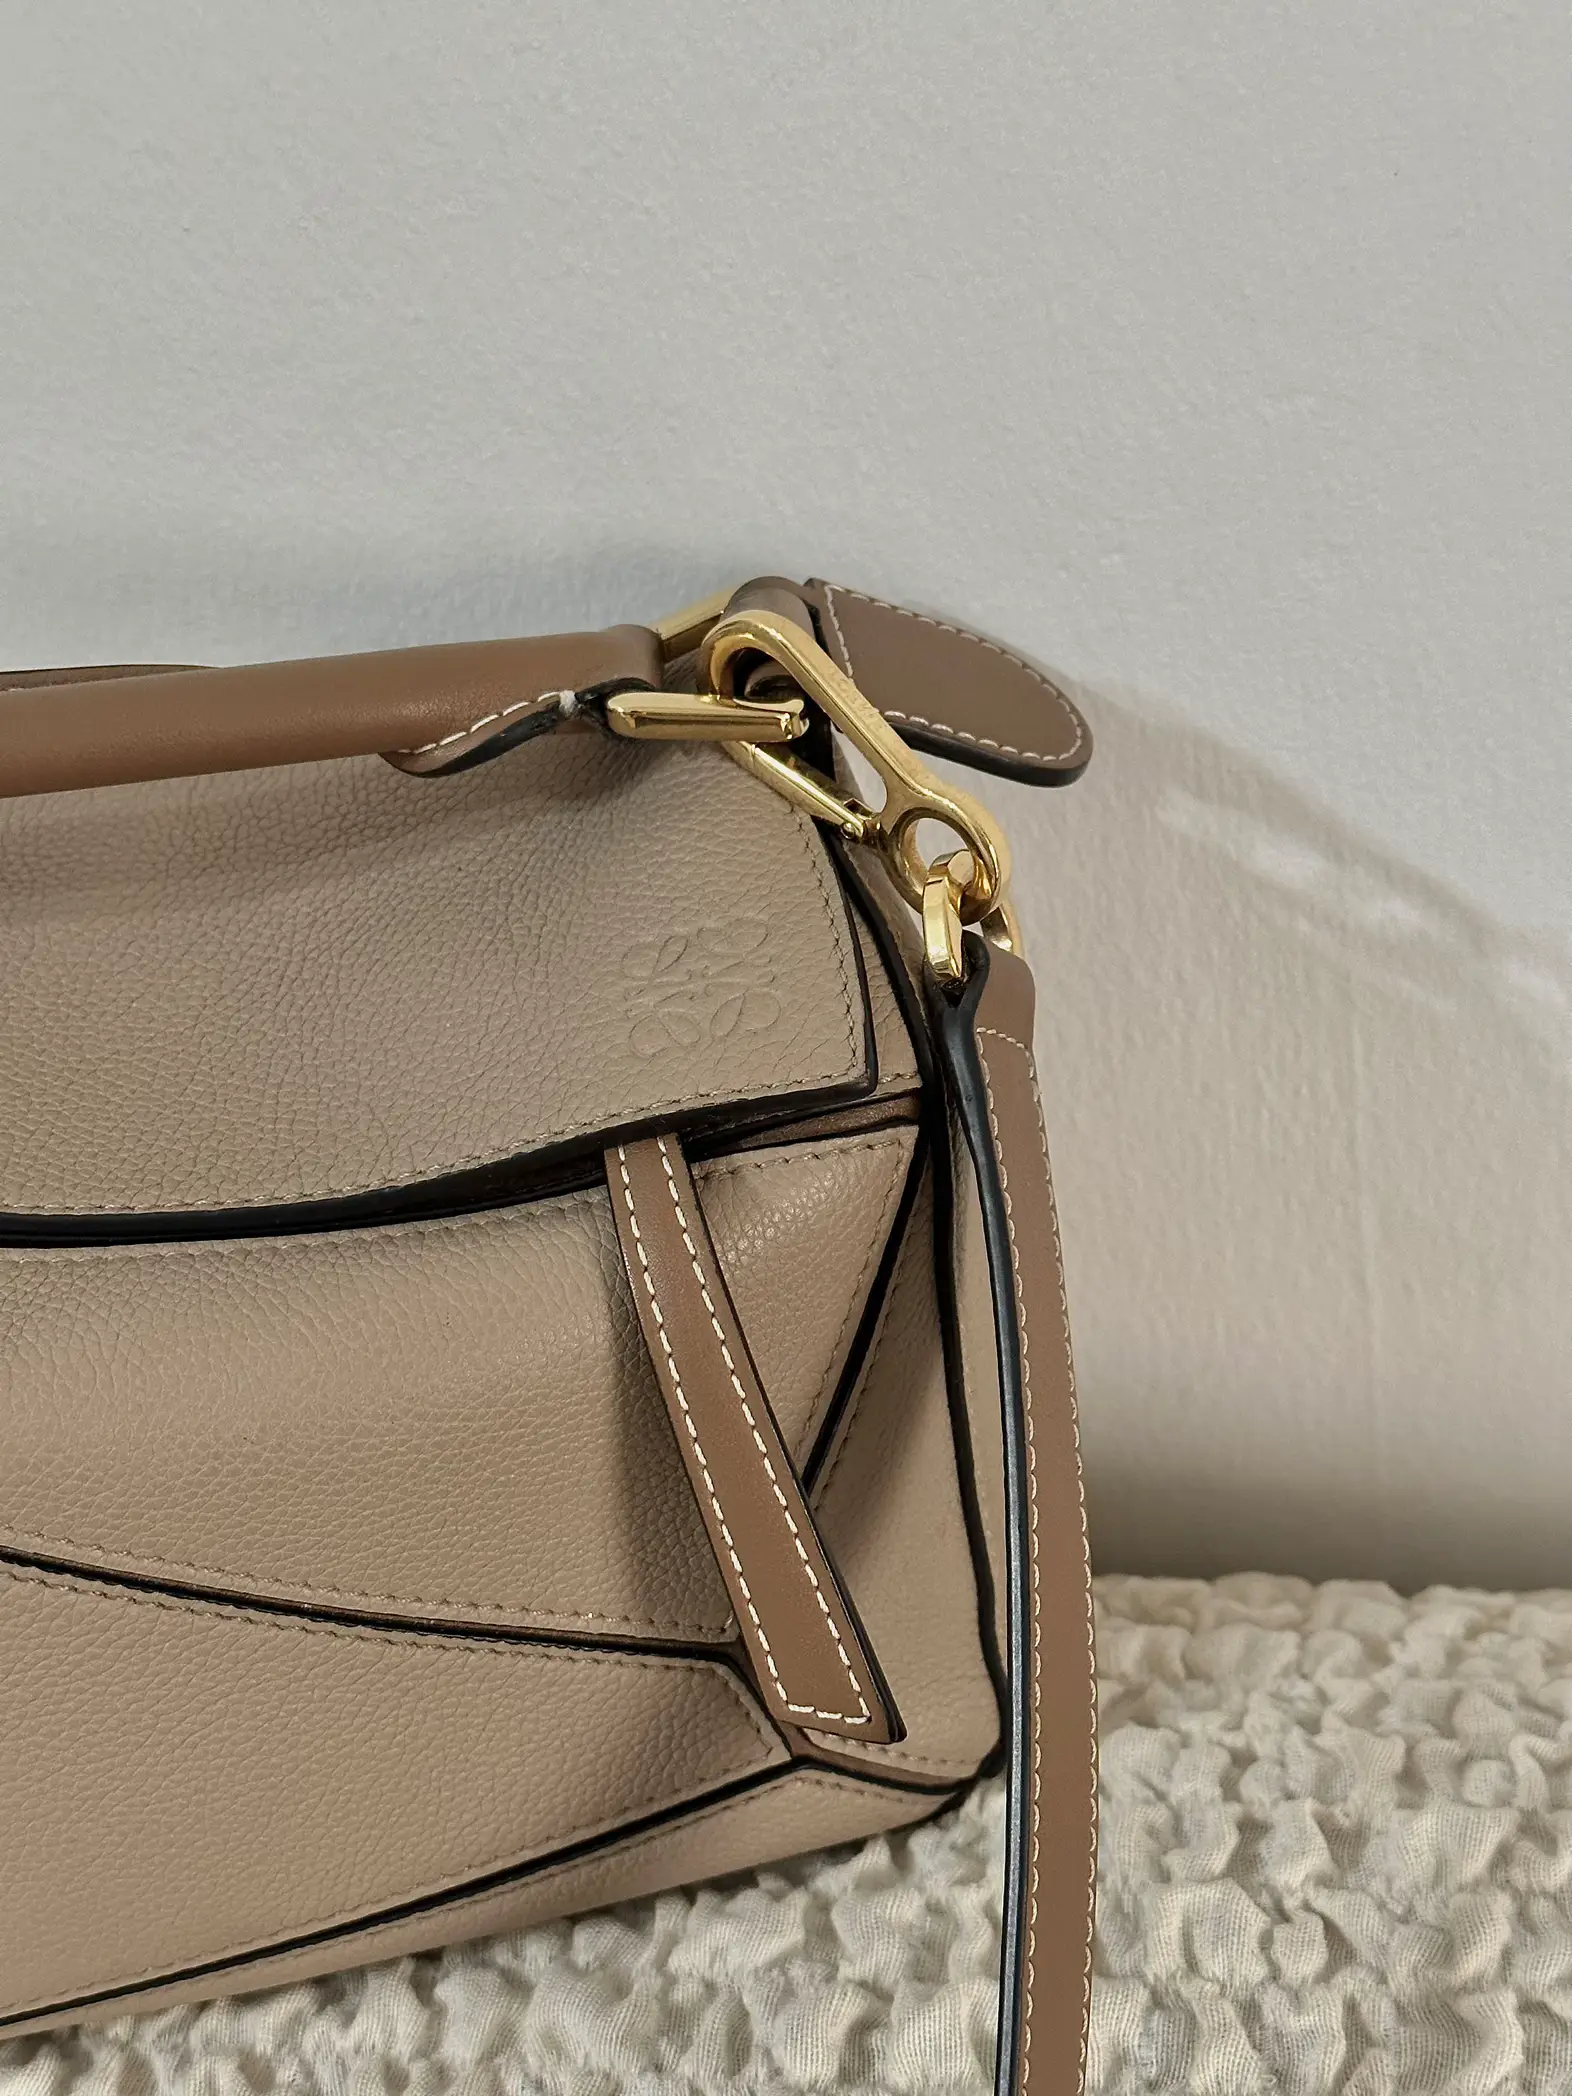 Loewe Puzzle Bag Medium Wear and Tear and Review 